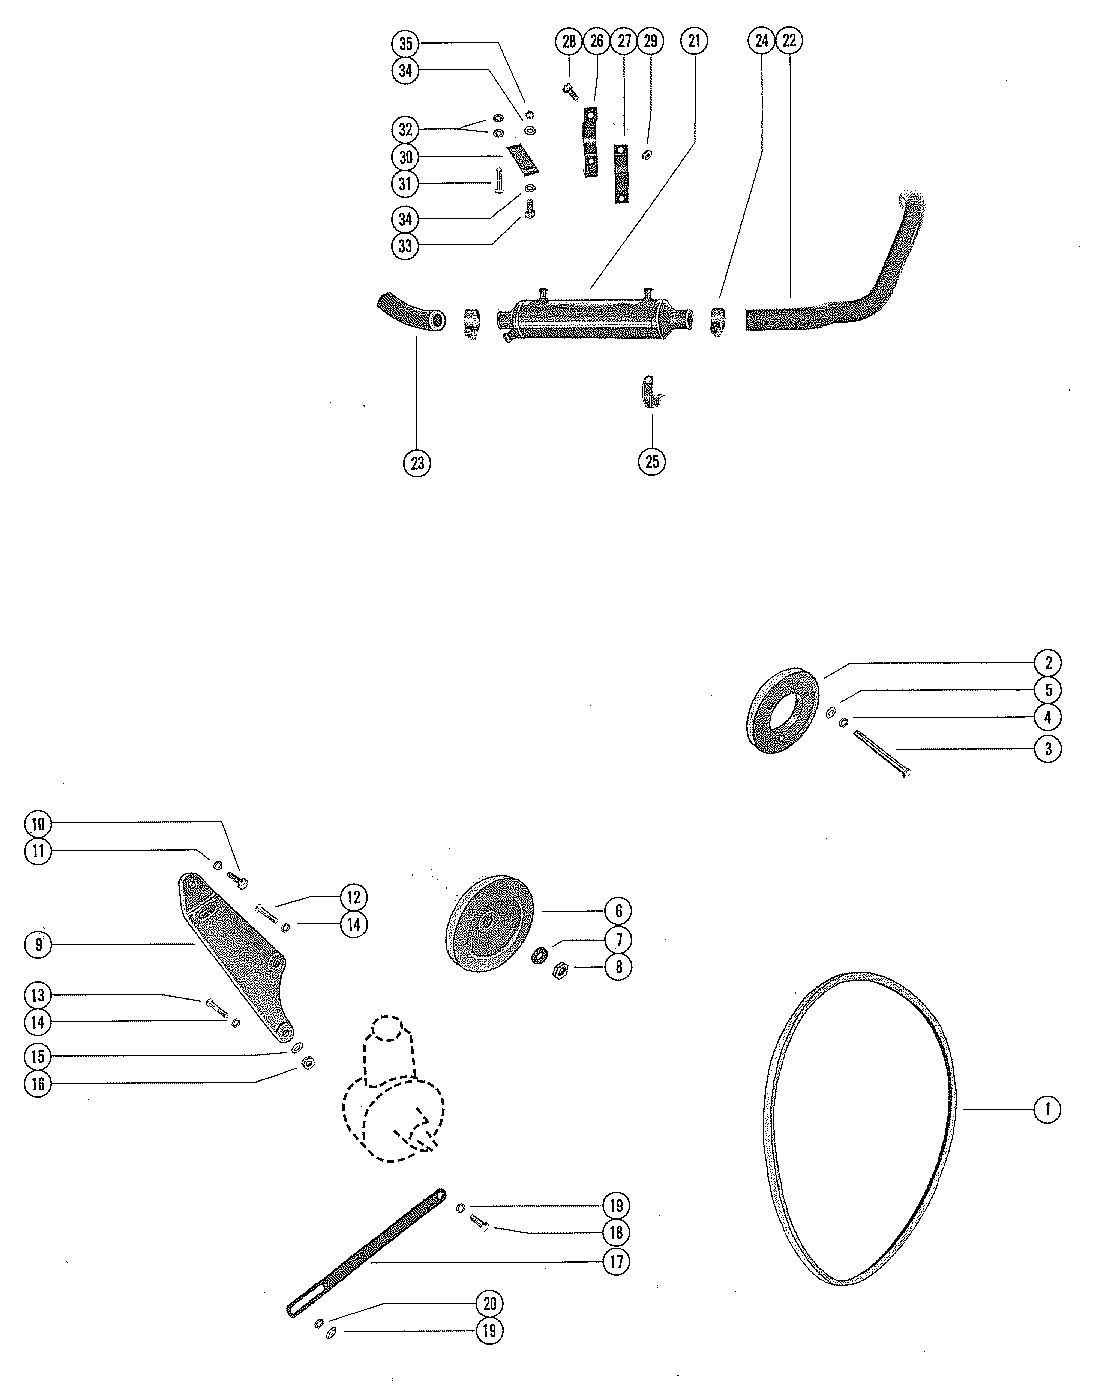 MERCRUISER 255 ENGINE POWER STEERING COMPONENTS (WITH "V" BELT)